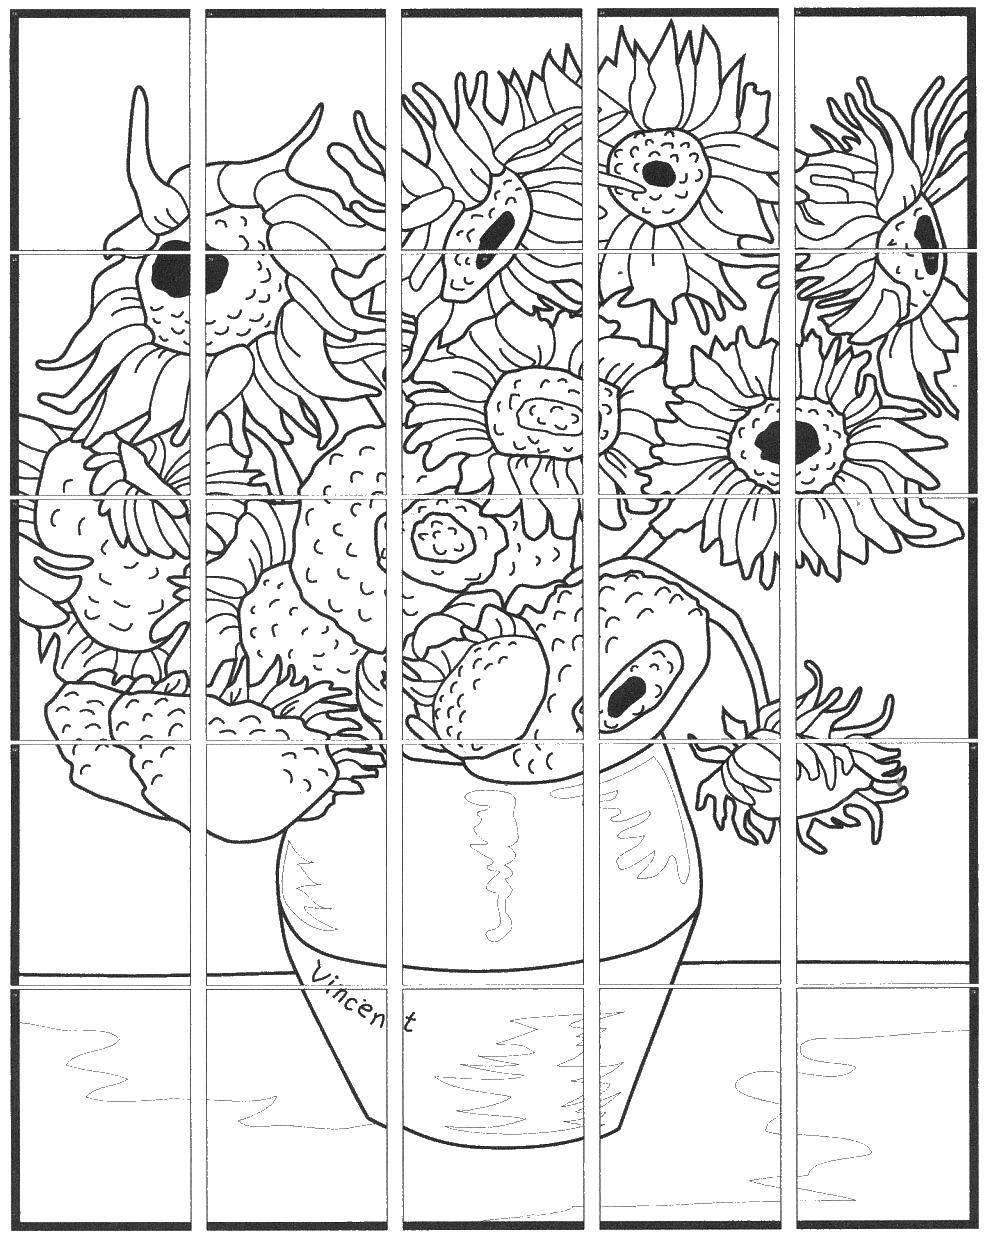 Coloring Sunflowers. Category coloring. Tags:  sunflowers, vase, van Gogh.